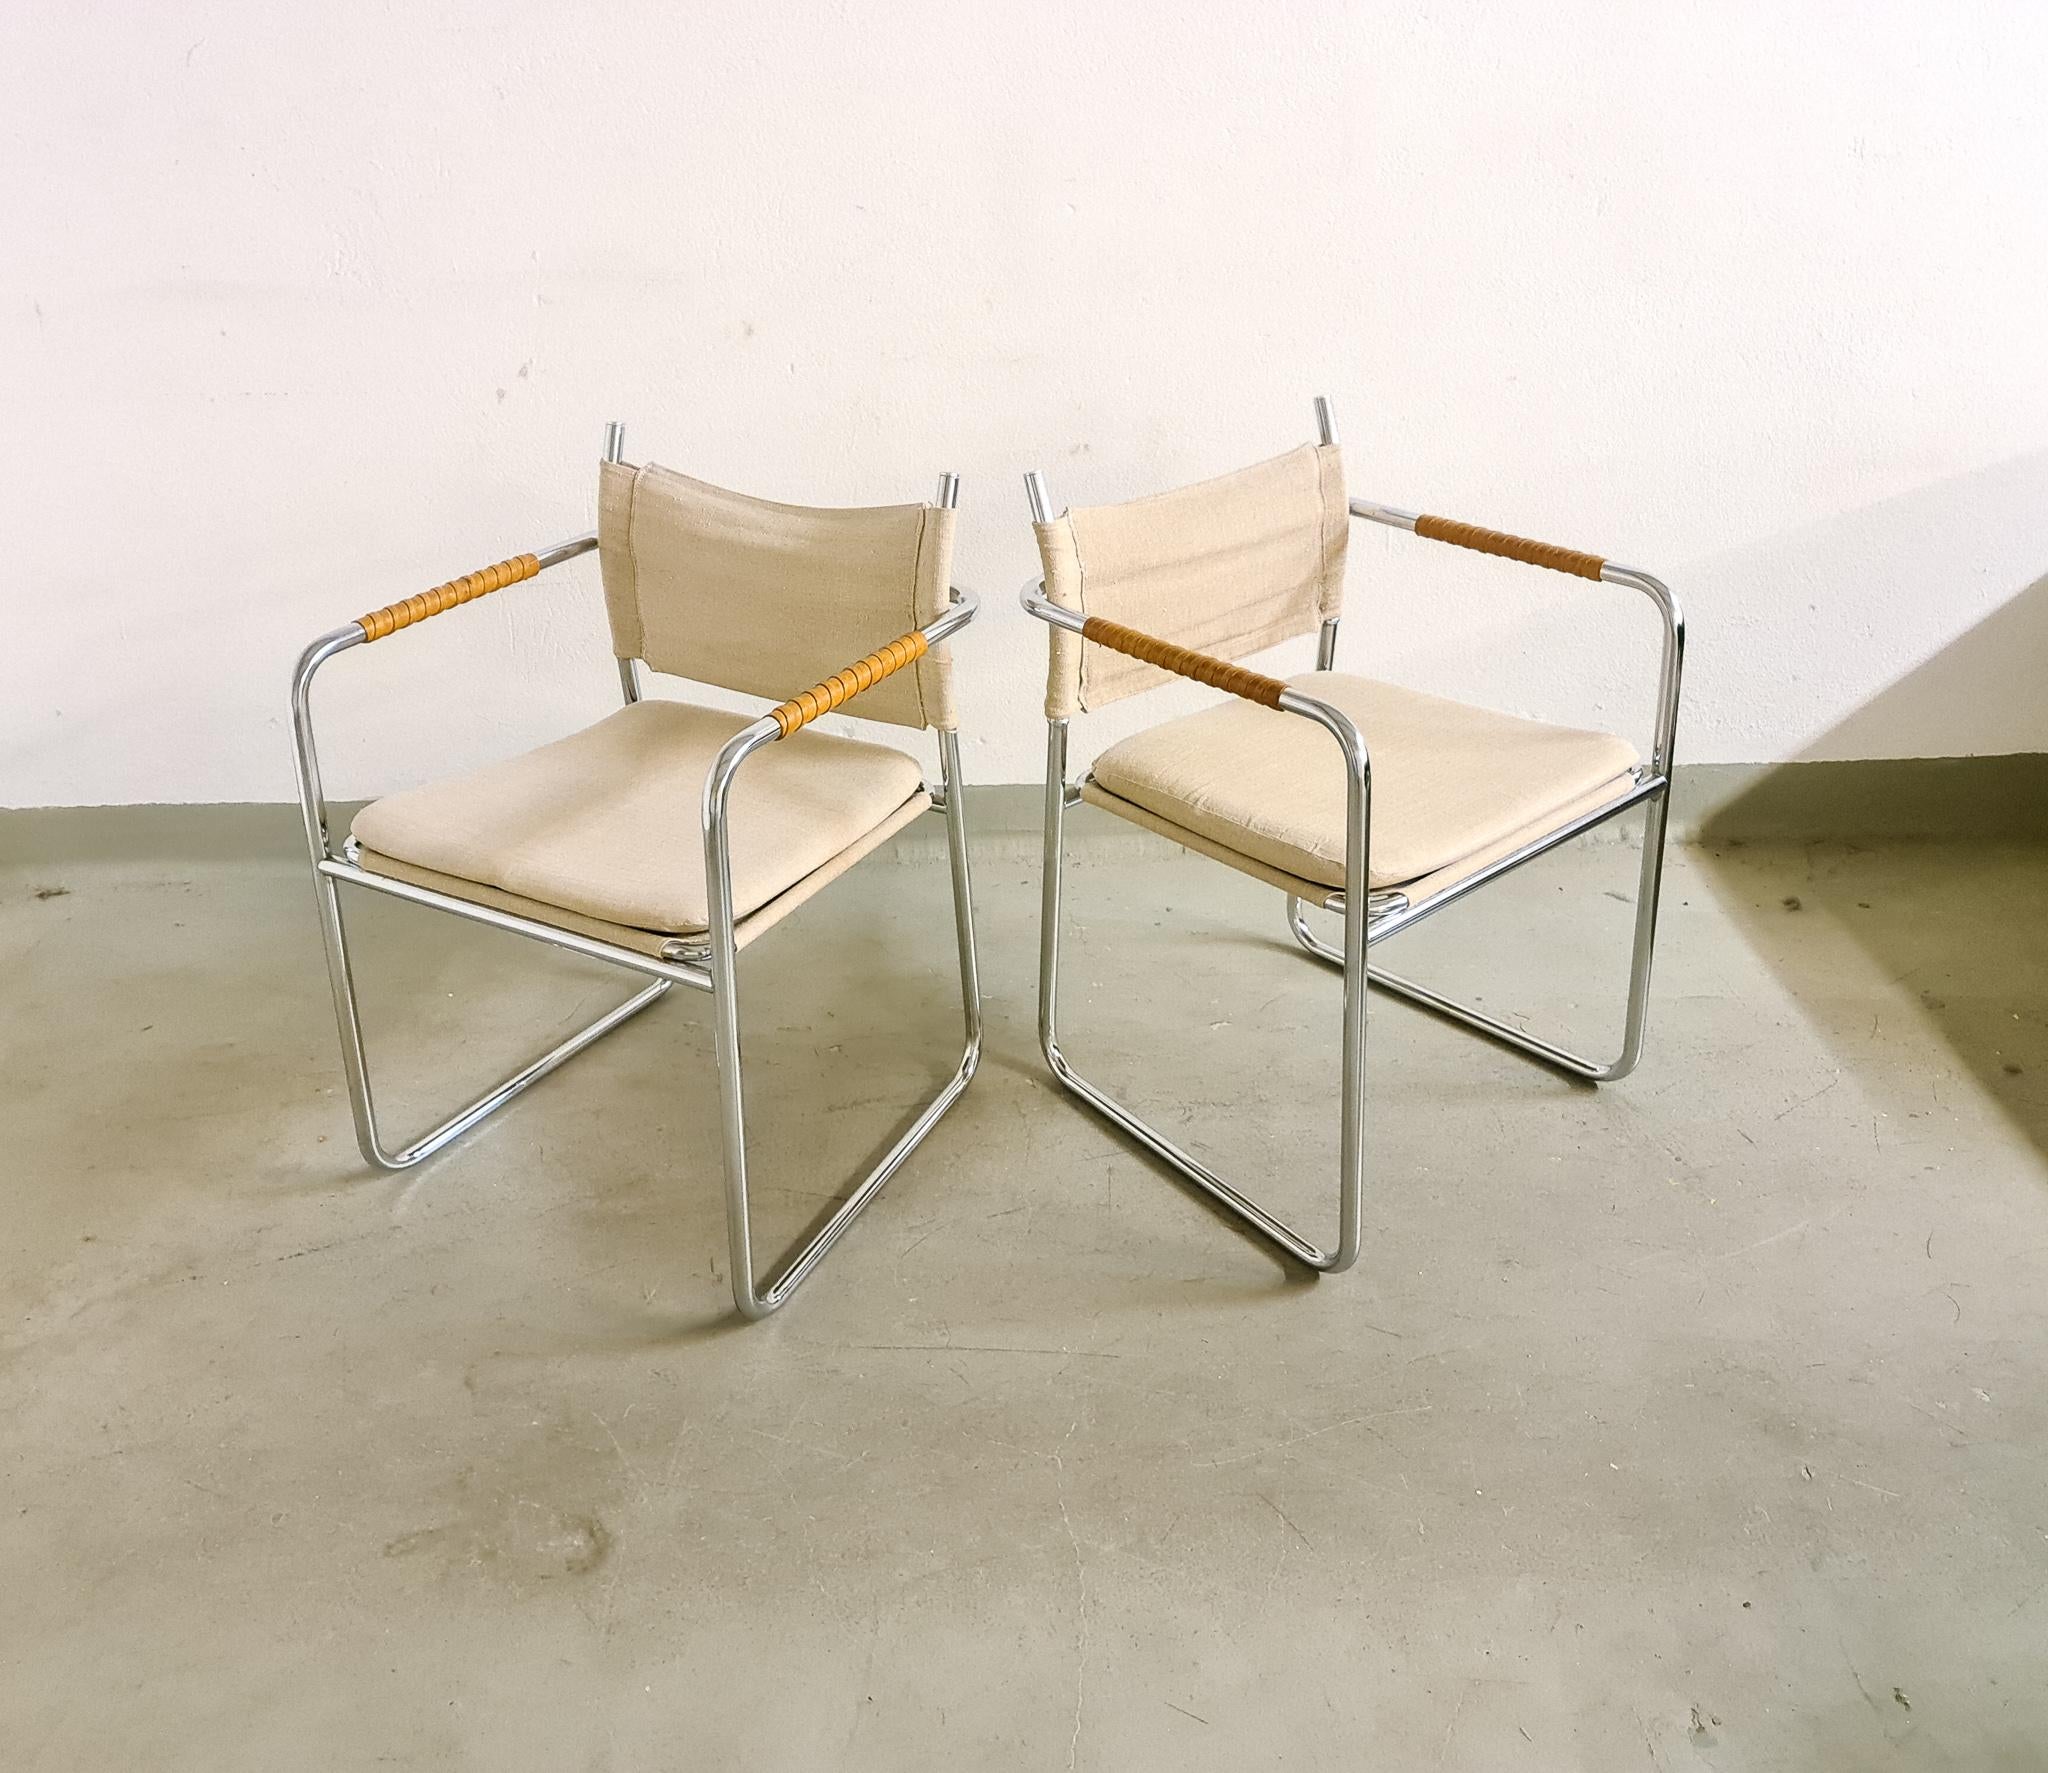 Armchairs model Amiral designed by Karin Mobring, 1971. Produced by Ikea in Sweden.
These ones are sold as a pair. This pair is made in tubular steel frame with handles wrapped in leather. The upholstery is made by canvas and so are the